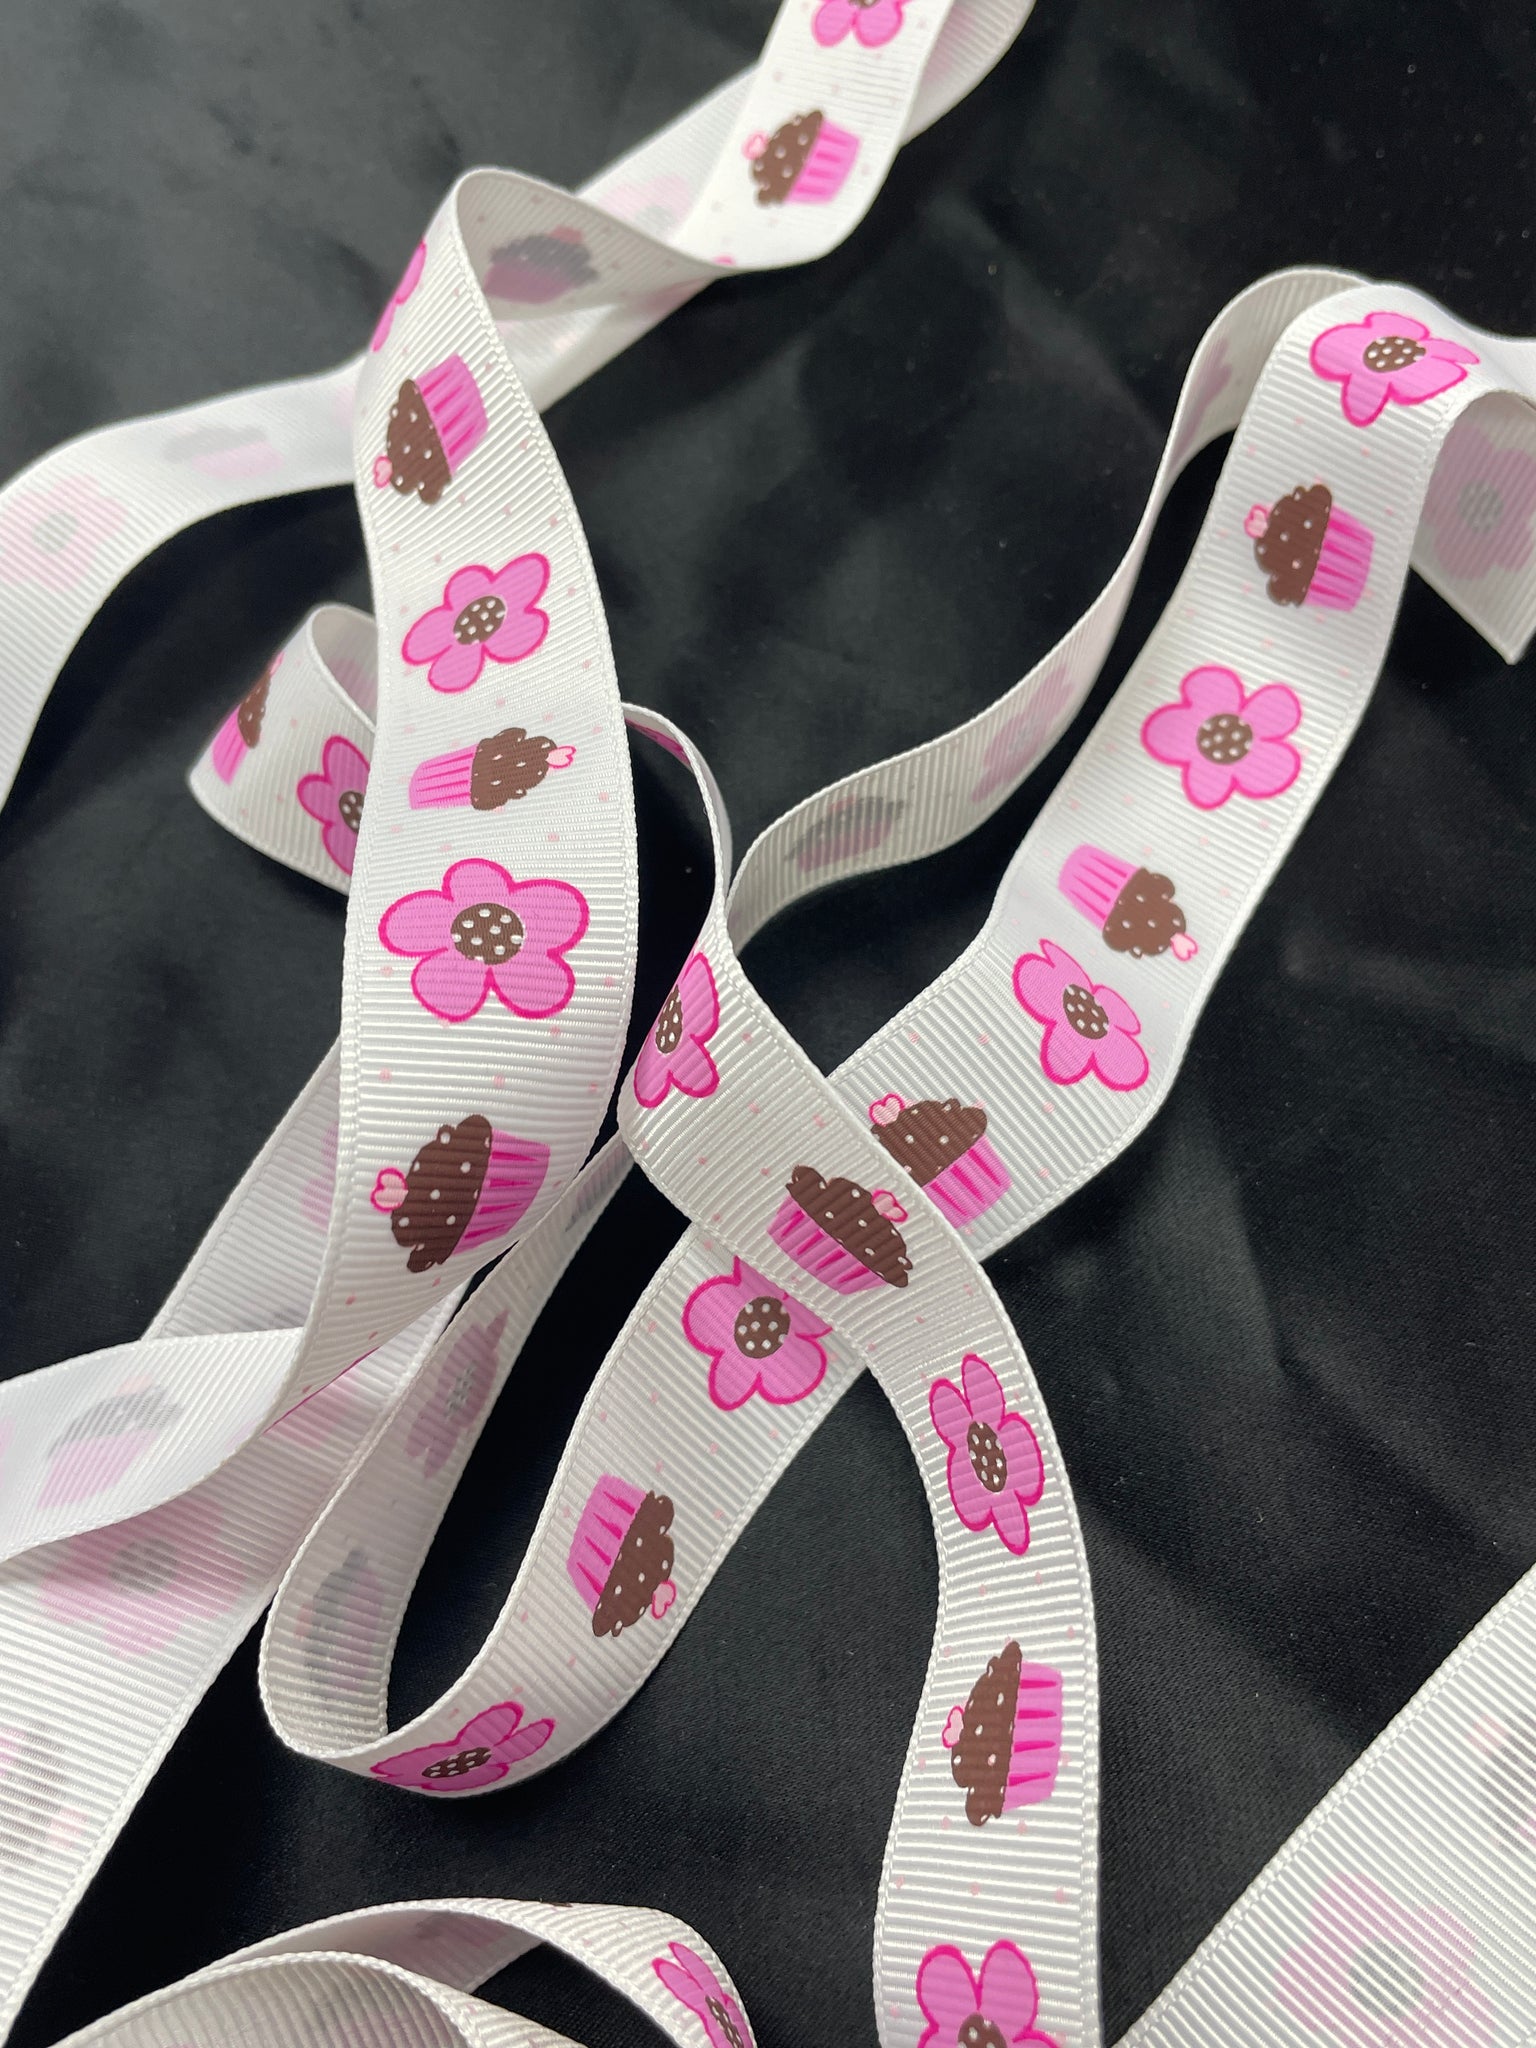 3 YD Polyester Printed Grosgrain Ribbon - White with Pink Flowers and Cupcakes